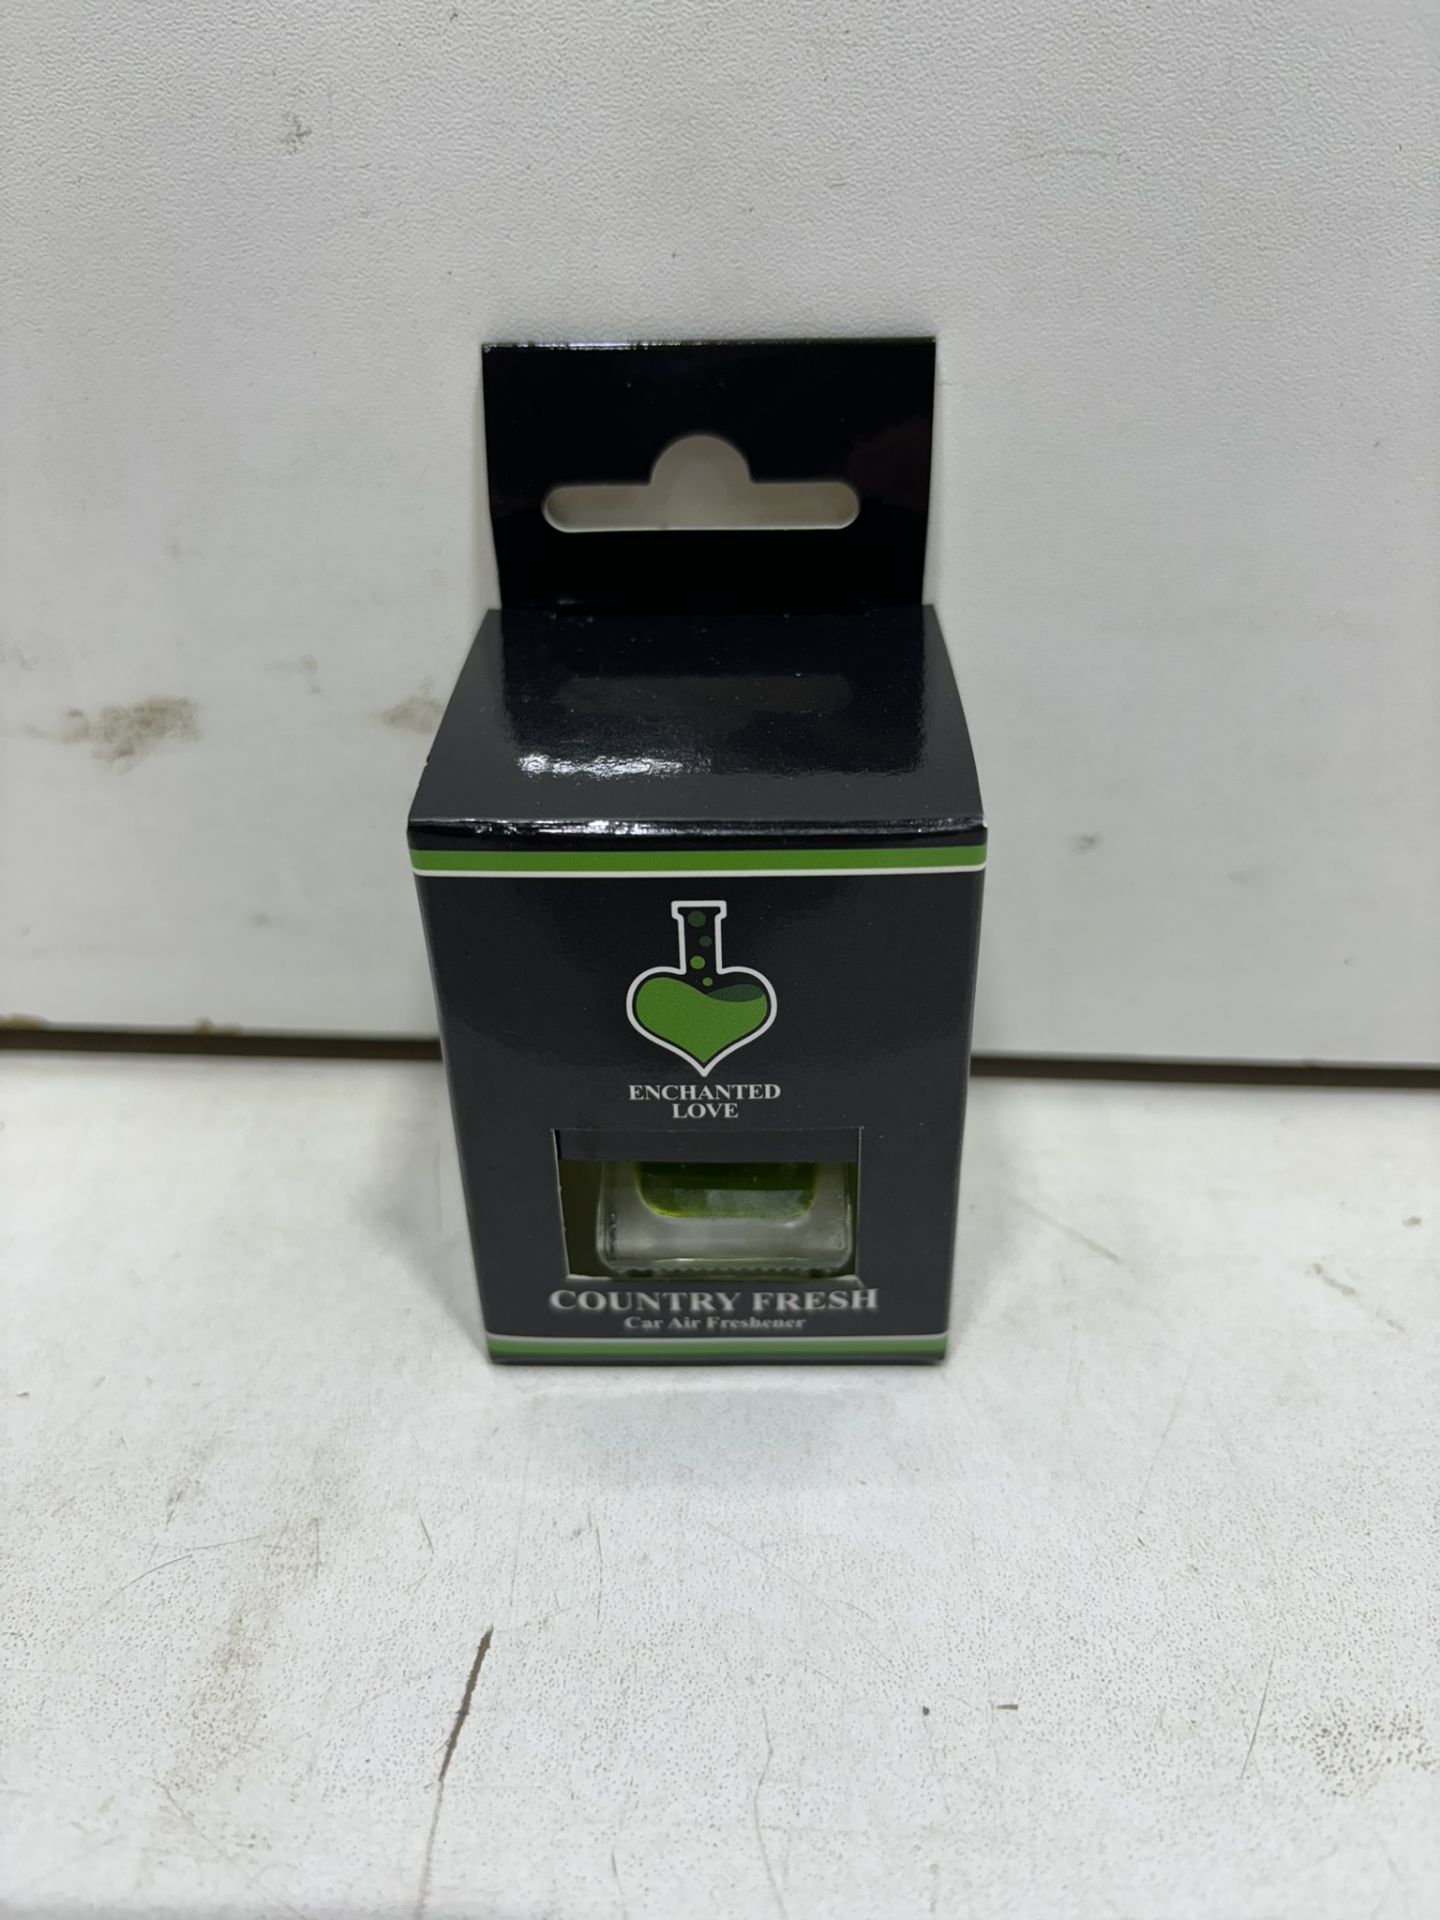 145 x Enchanted Love "Country Fresh" Car Air Fresheners 8ml - Image 2 of 5